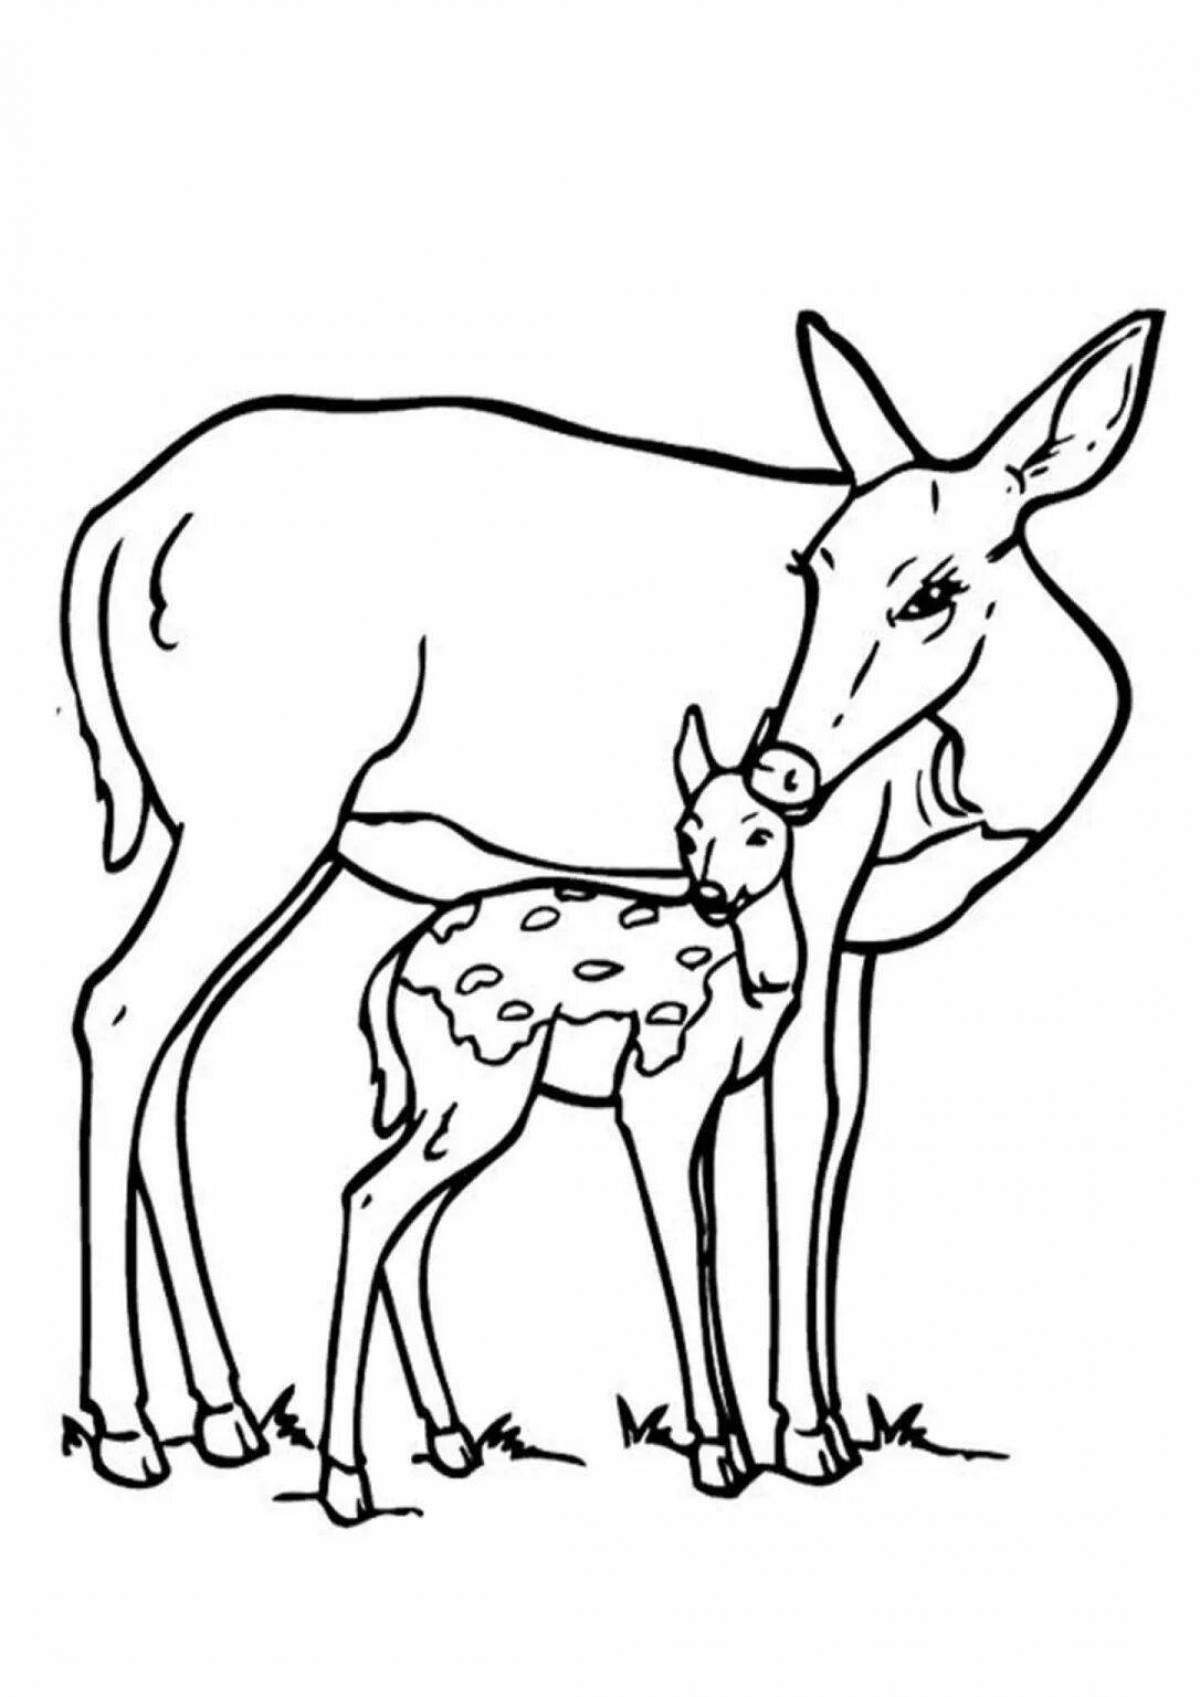 Adorable roe deer coloring book for little ones